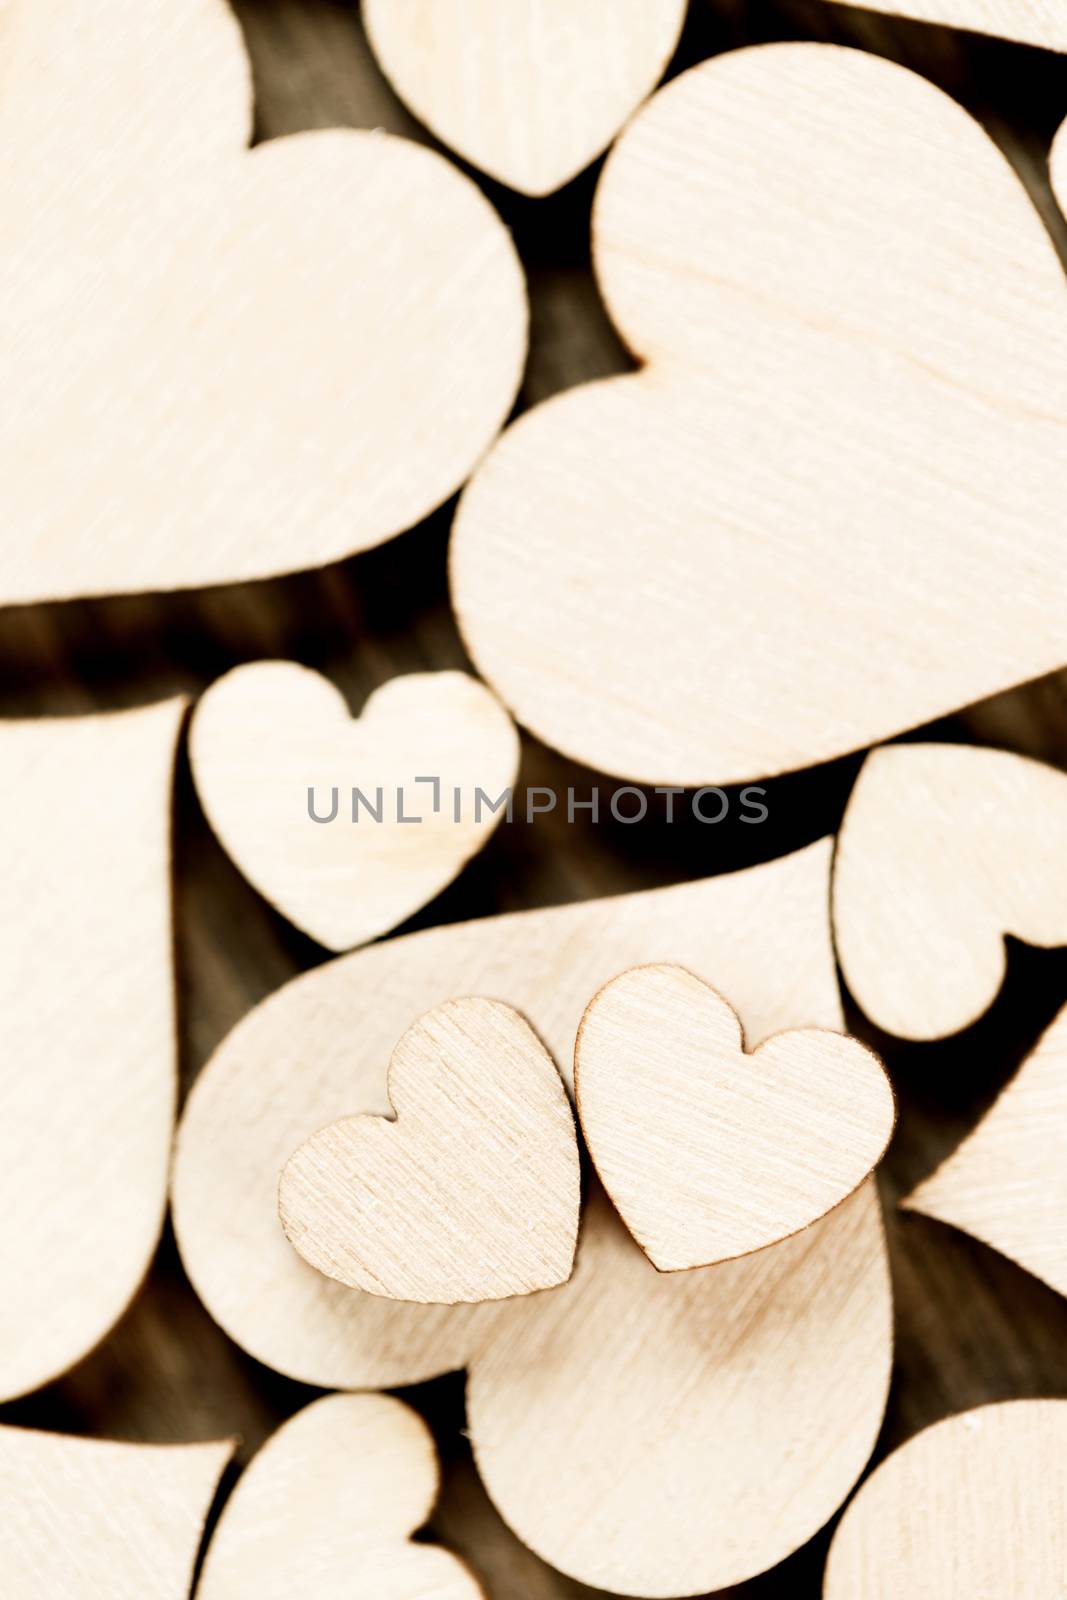 Many wooden colorless hearts background, two special ones true love concept